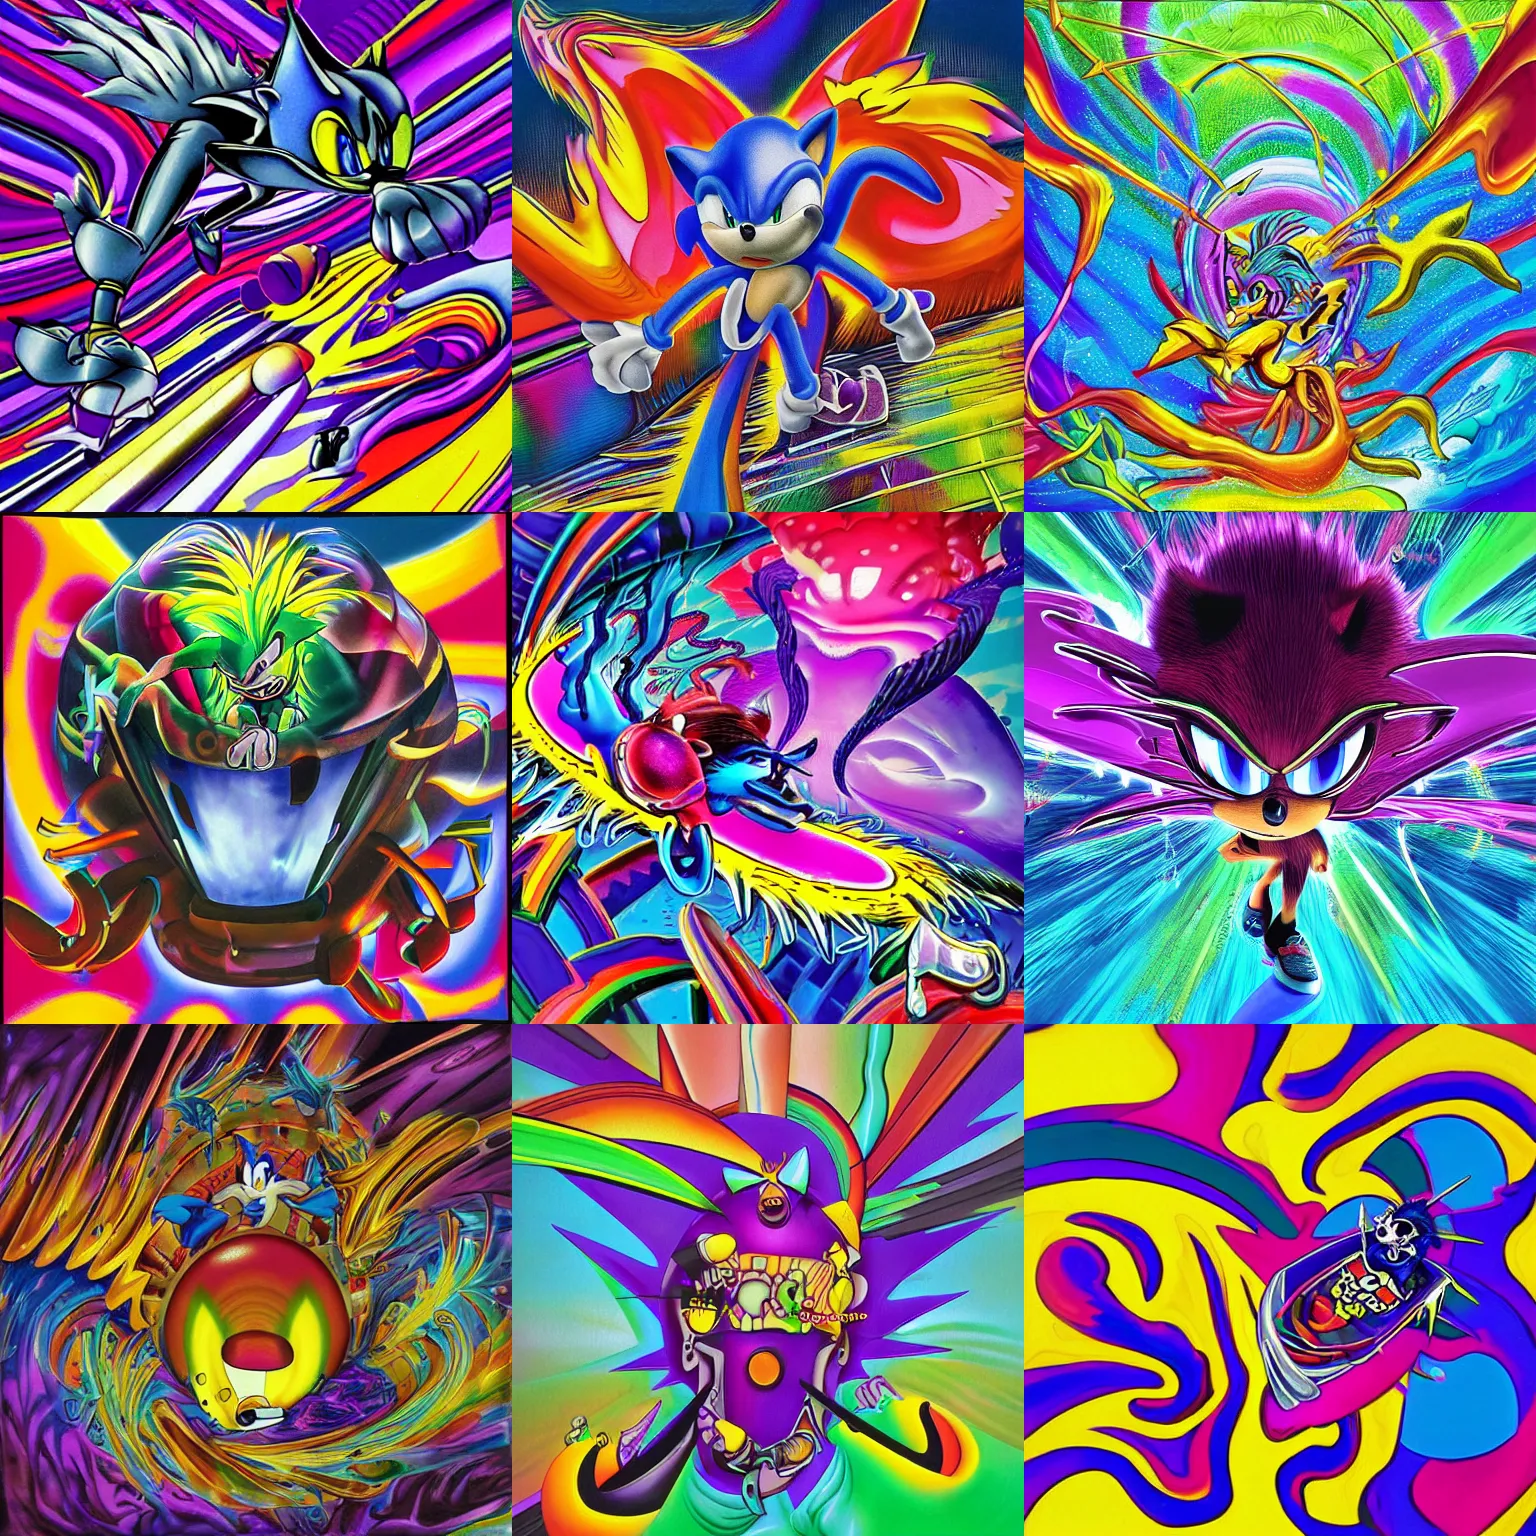 Prompt: surreal, sharp, detailed professional, high quality airbrush art MGMT album cover portrait of a liquid dissolving LSD DMT sonic the hedgehog surfing through cyberspace, purple checkerboard background, 1990s 1992 Sega Genesis video game album cover